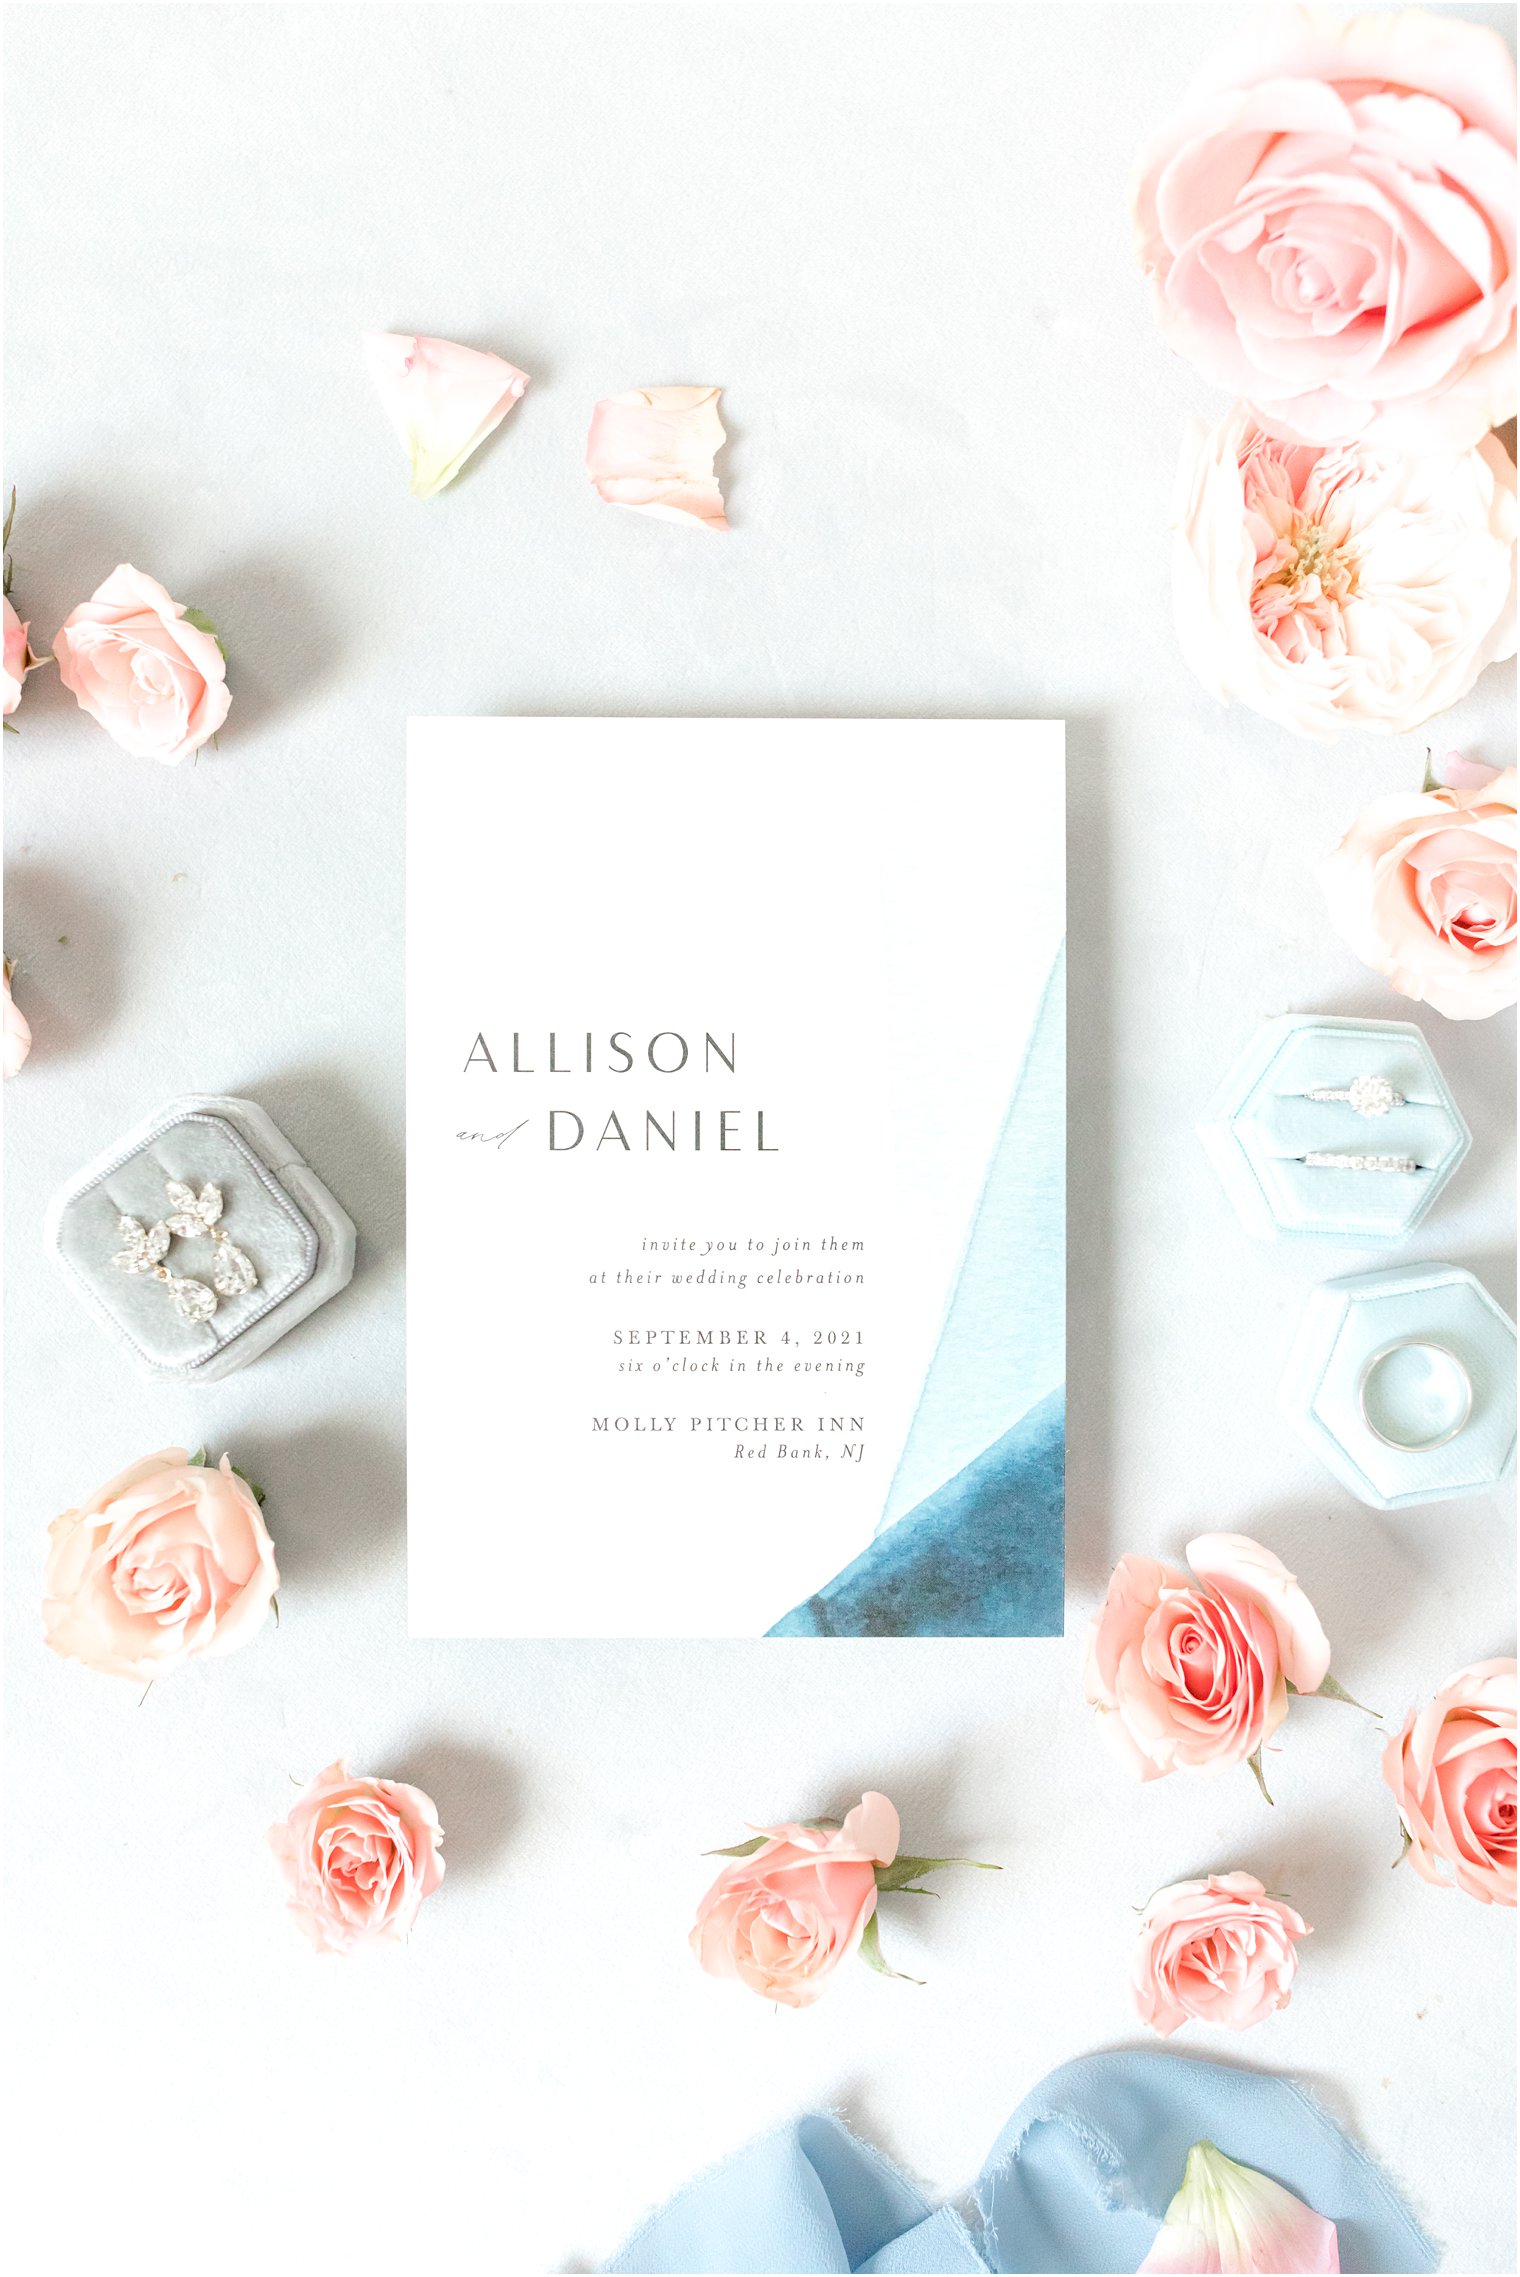 wedding invitation with pink and blue details around it